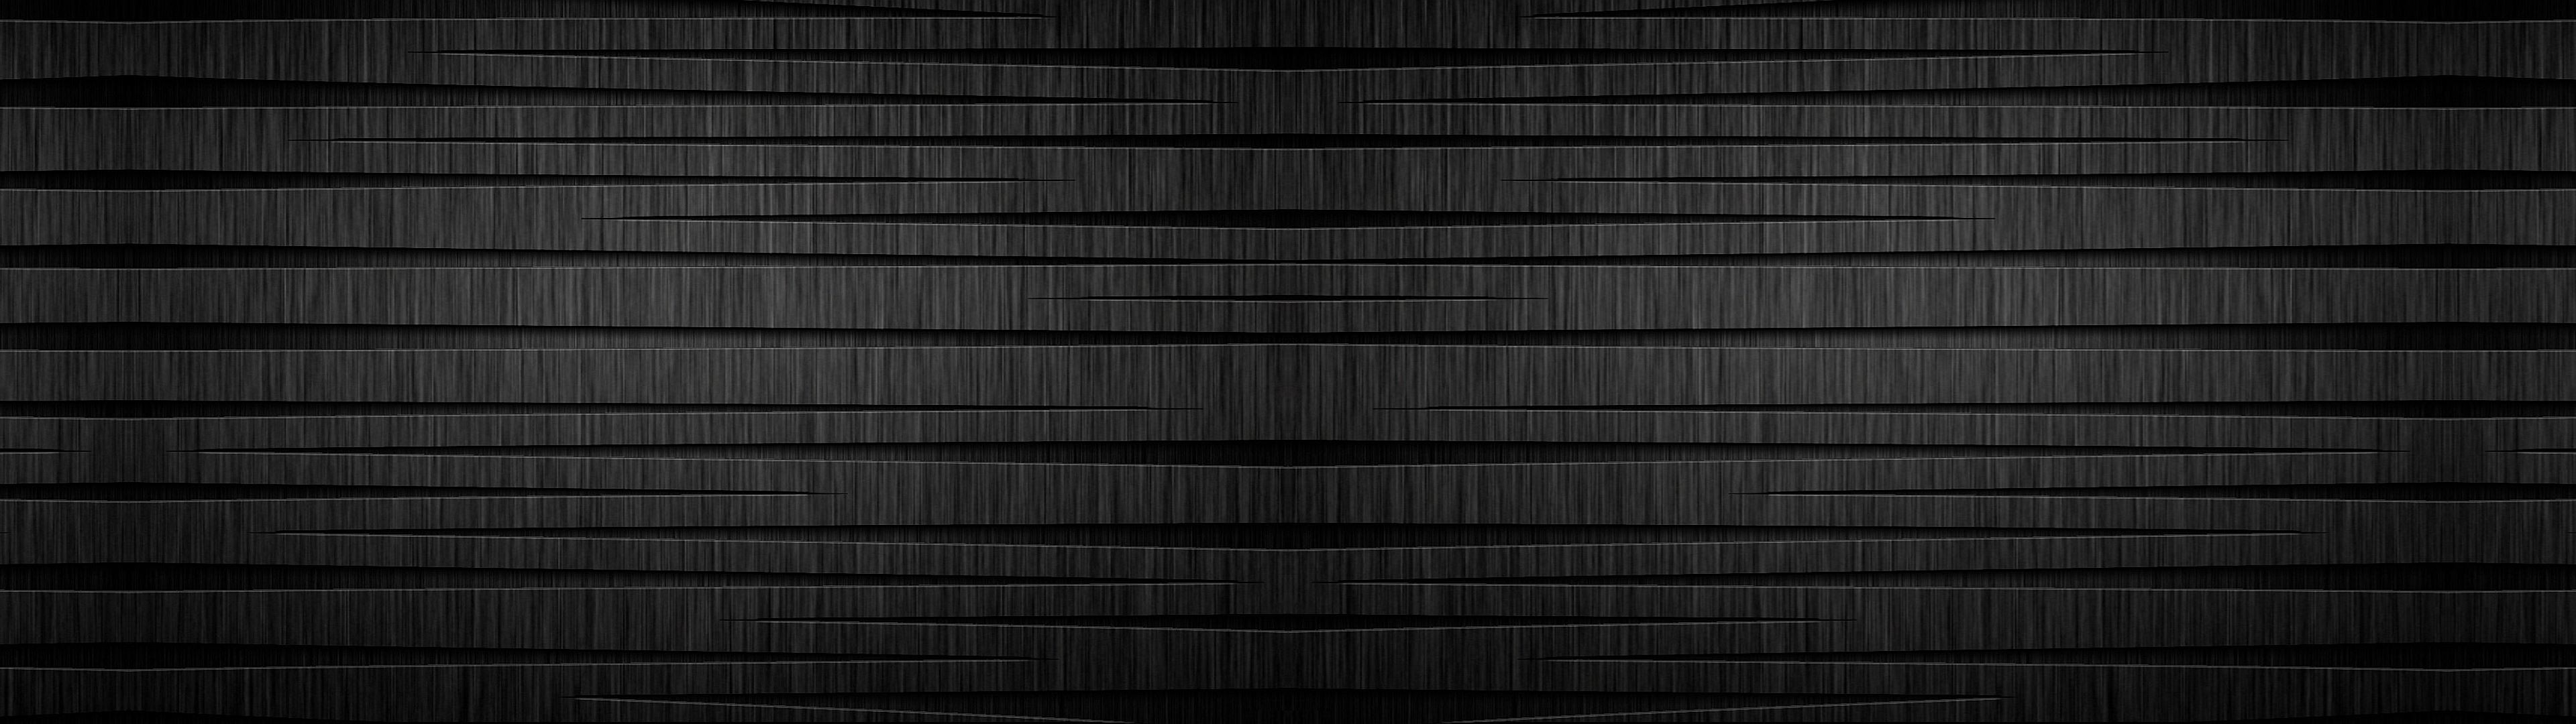 General 3840x1080 multiple display abstract lines digital art monochrome texture